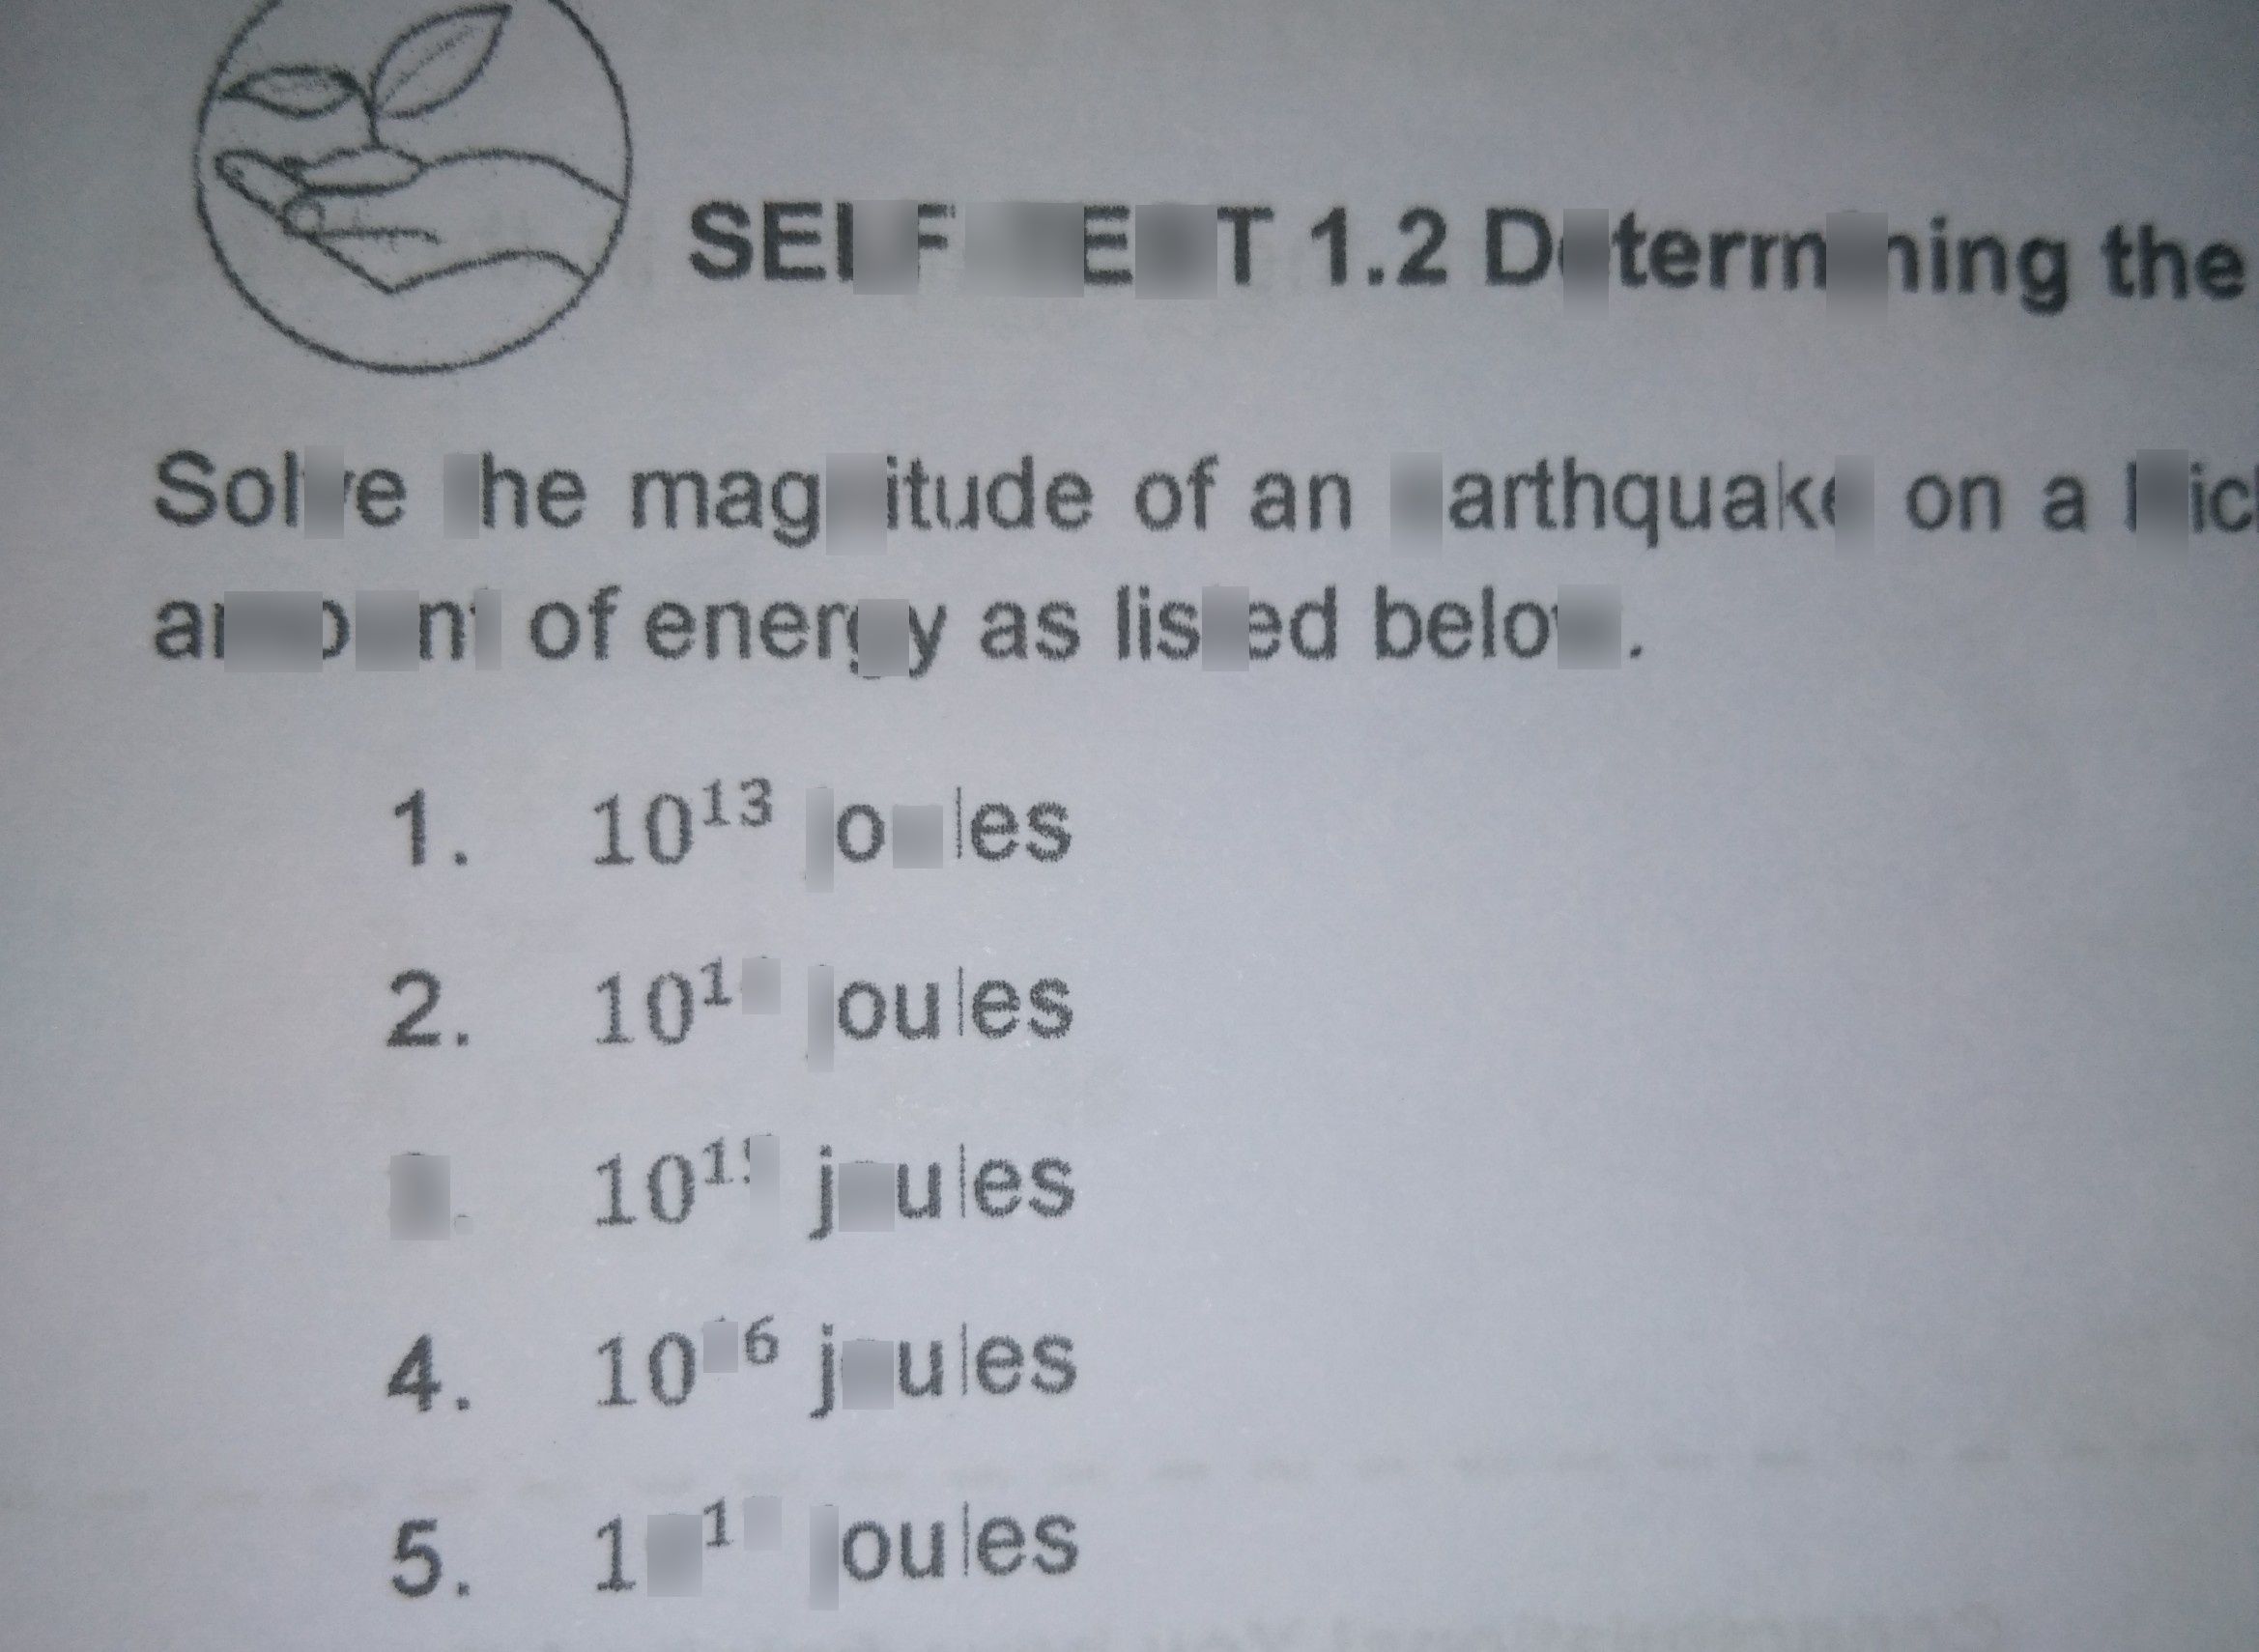 search-thumbnail-$sELF-7Es$ $1.2$ Determining the 
Solve the magnitude of an earthquake on a Ric 
amount of energy as listed below. 
$1$ $10^{13}$ joules 
$2$ $10^{14}$ joules 
$3$ $10^{15}$ $10u|e5$ 
$4.$ $10^{16}$ $10u|eS$ 
$5.$ $10^{17}$ $10u|eS$ 